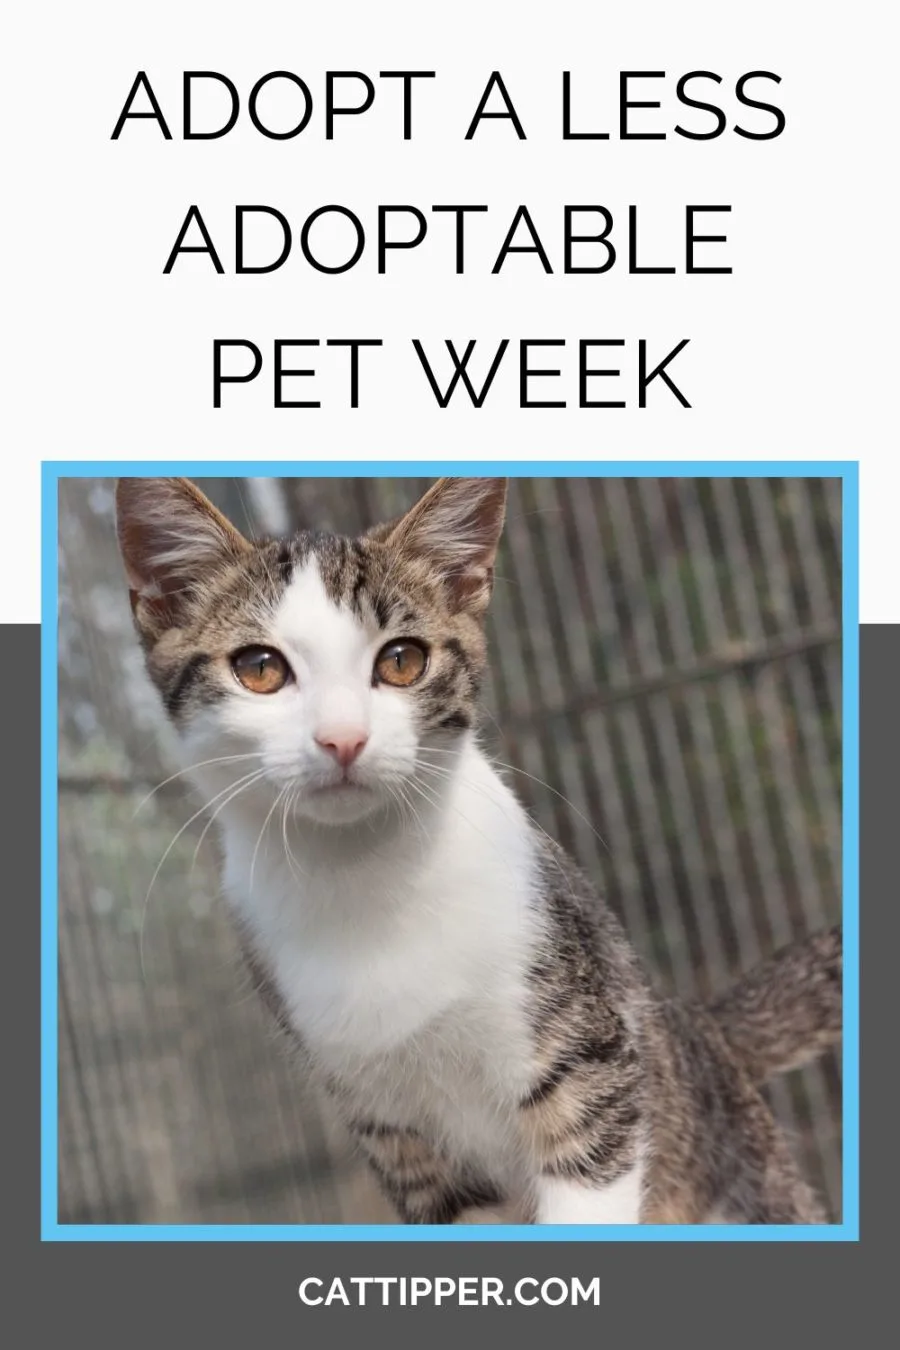 Adopt A Less Adoptable Pet Week shines a spotlight on the cats and dogs that are often overlooked in shelters